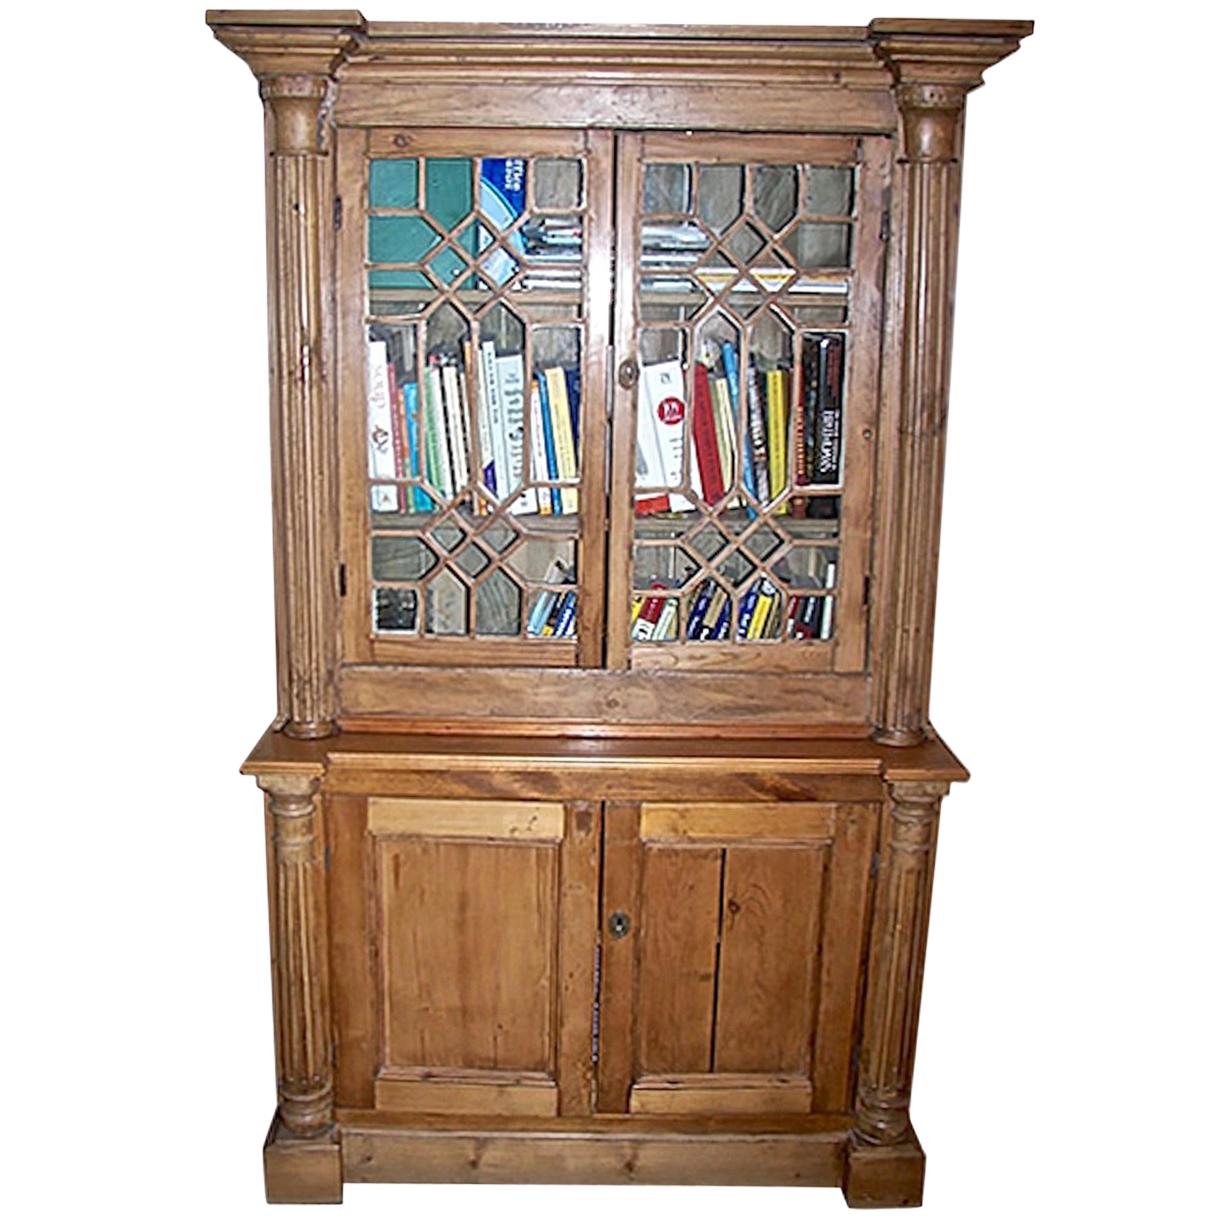 English 19th century stained glass cabinet with two glass doors and two shelves with original glass.
This is the top half of a 2-piece library bookcase.
Other Measurements.
Bottom H 32''; W 44.5''; D 18.5''. $1,500
Total H 77.50''; W 47''; D 18.50''